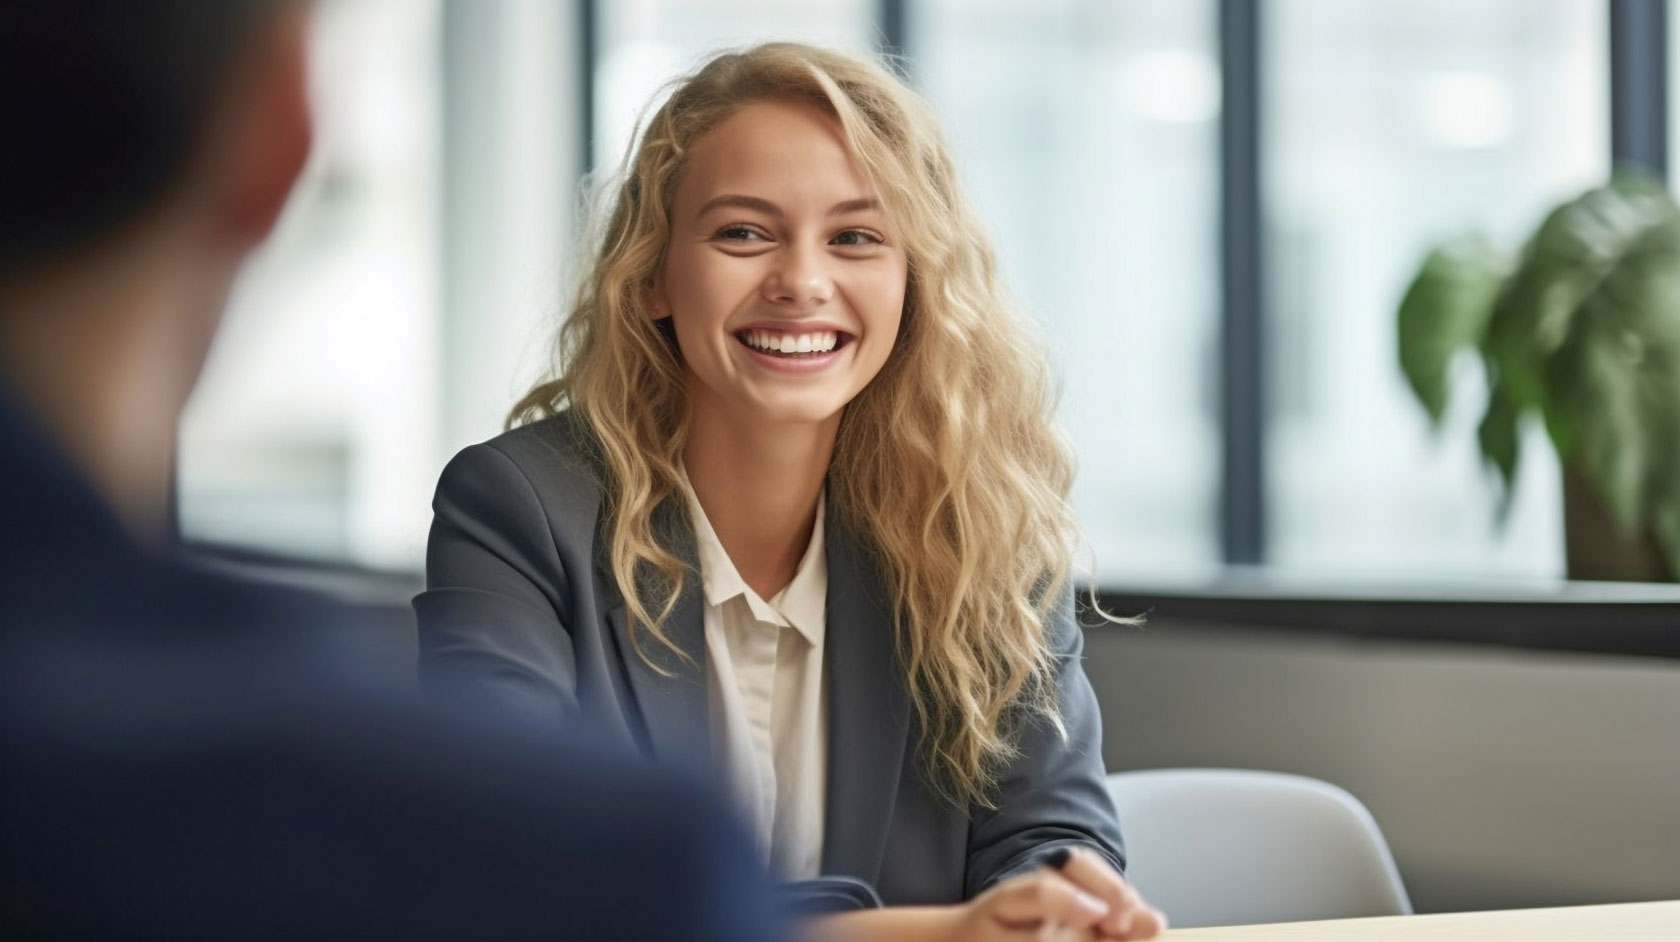 Young female sales person smiling during an interview for a new sales job